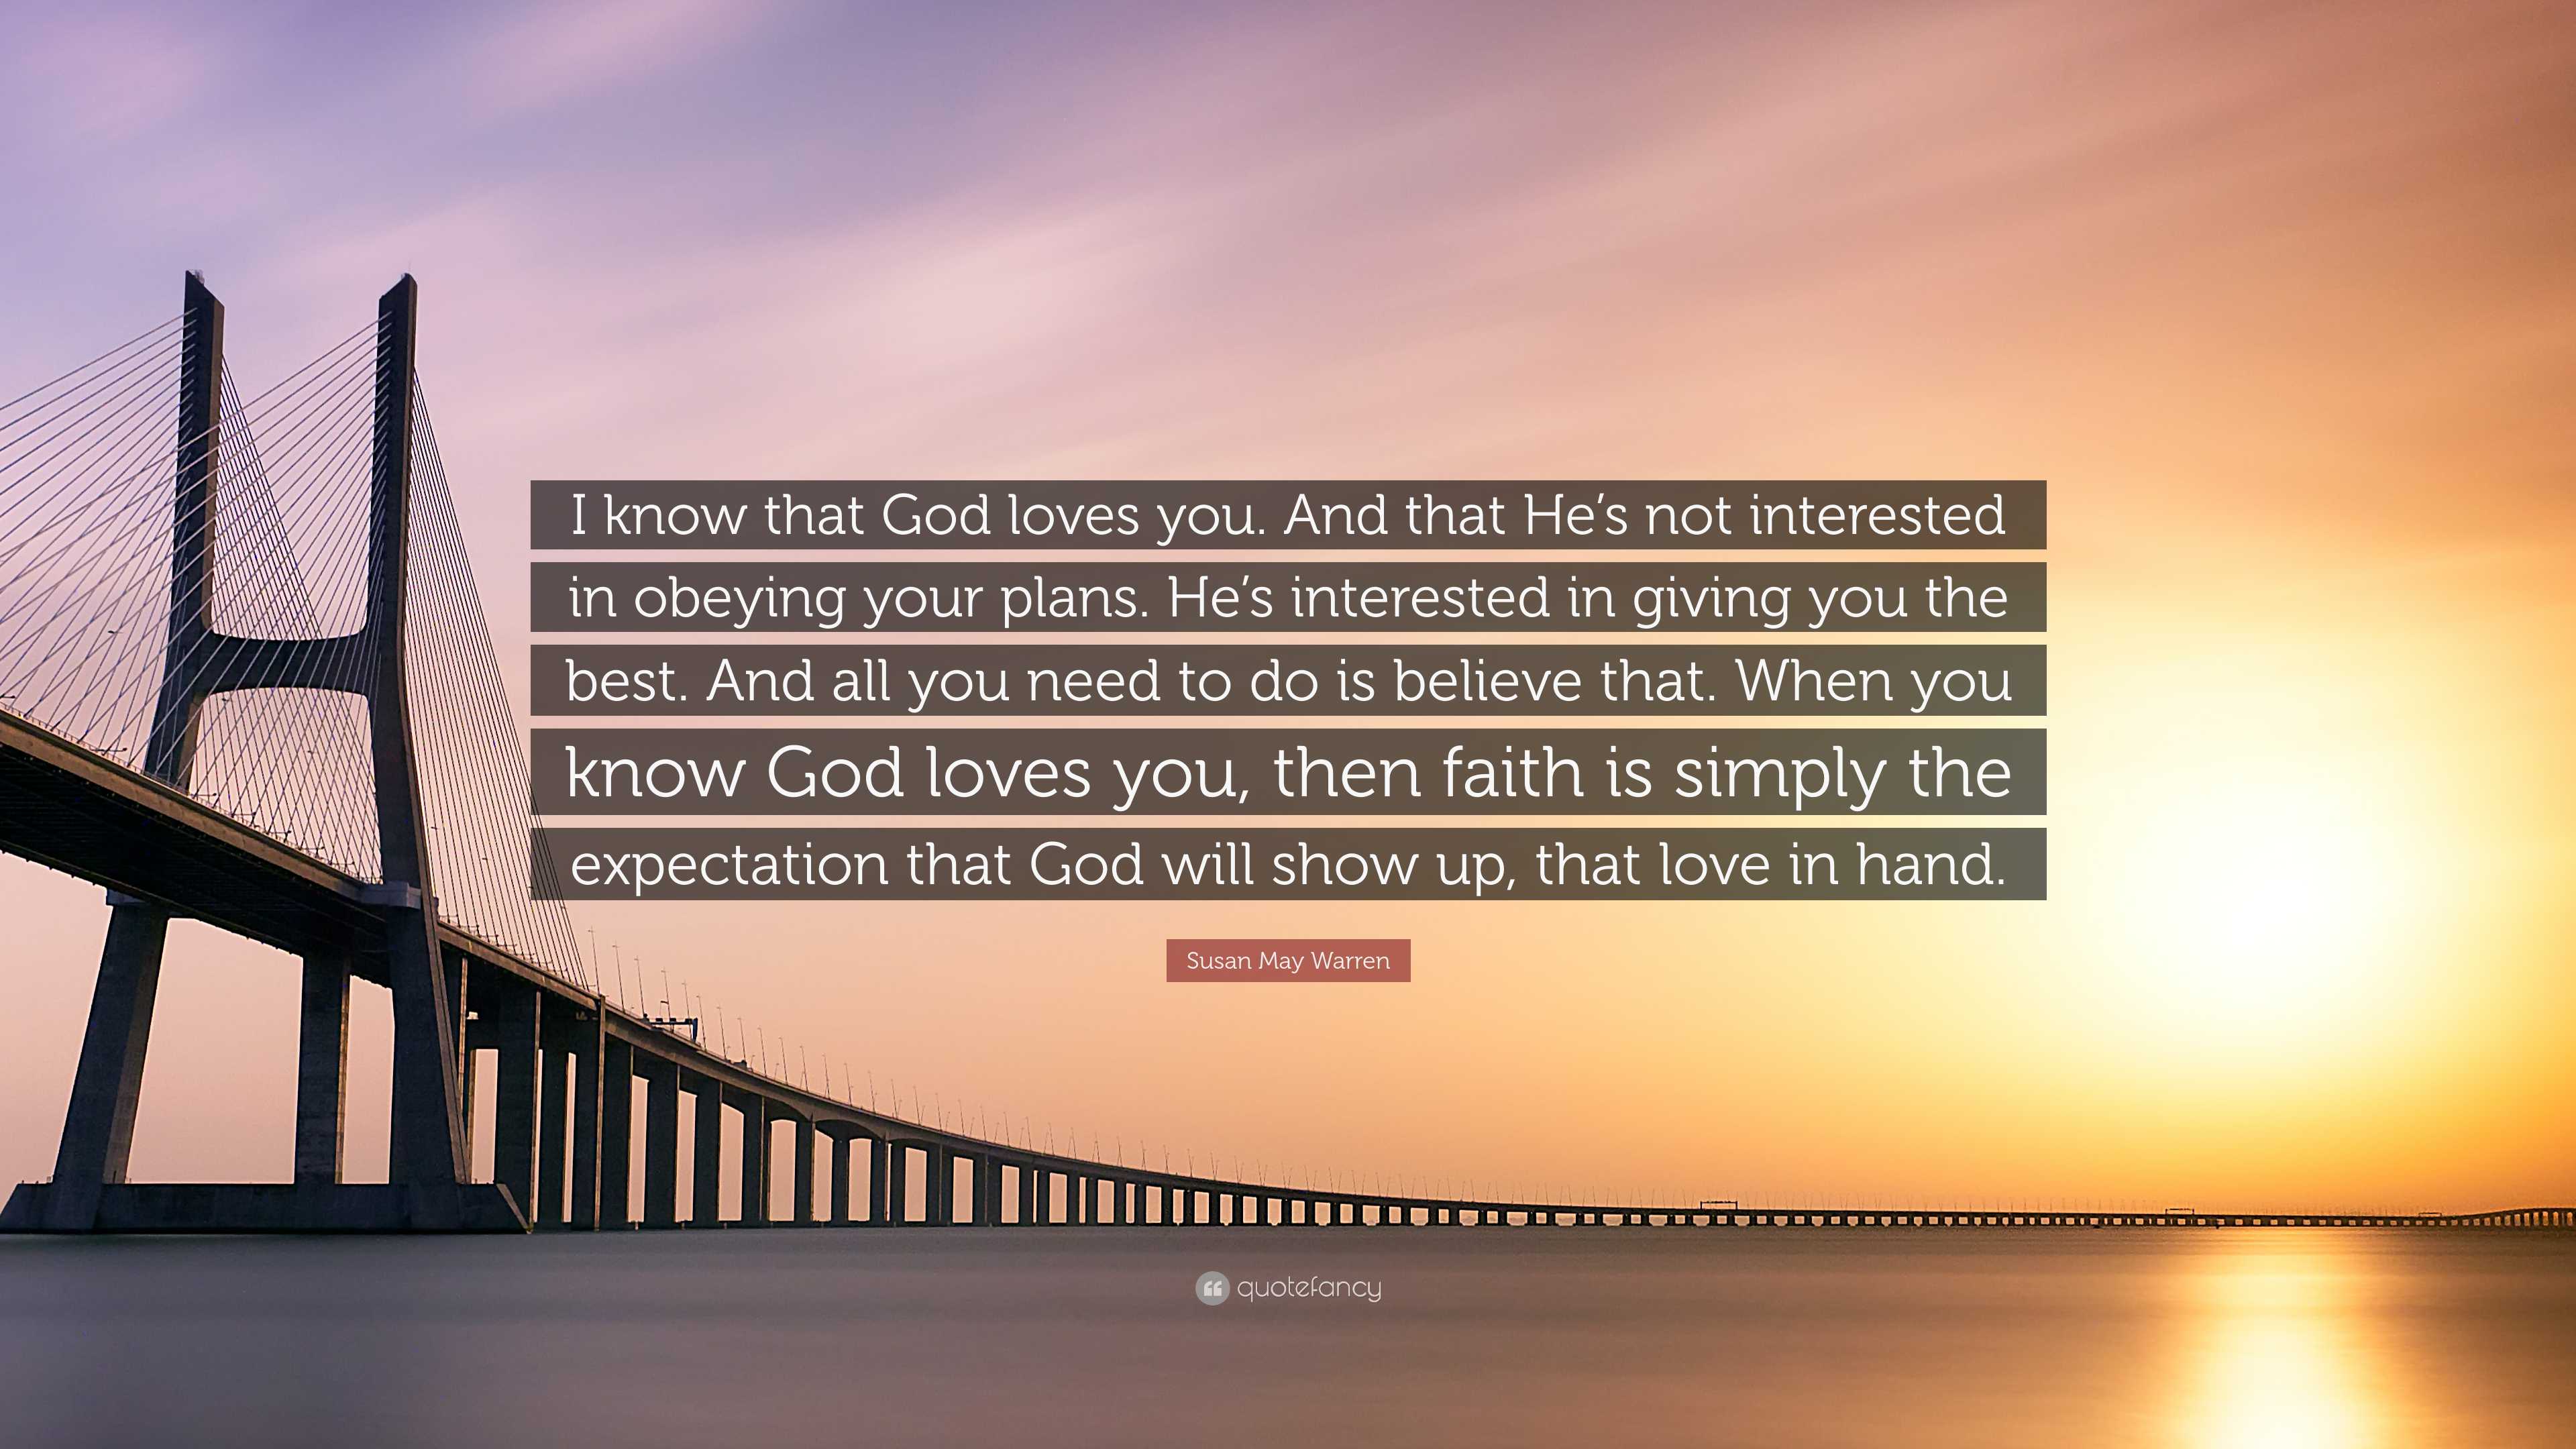 He Loves Me, He Loves Me Not: How to Know God Really Loves You